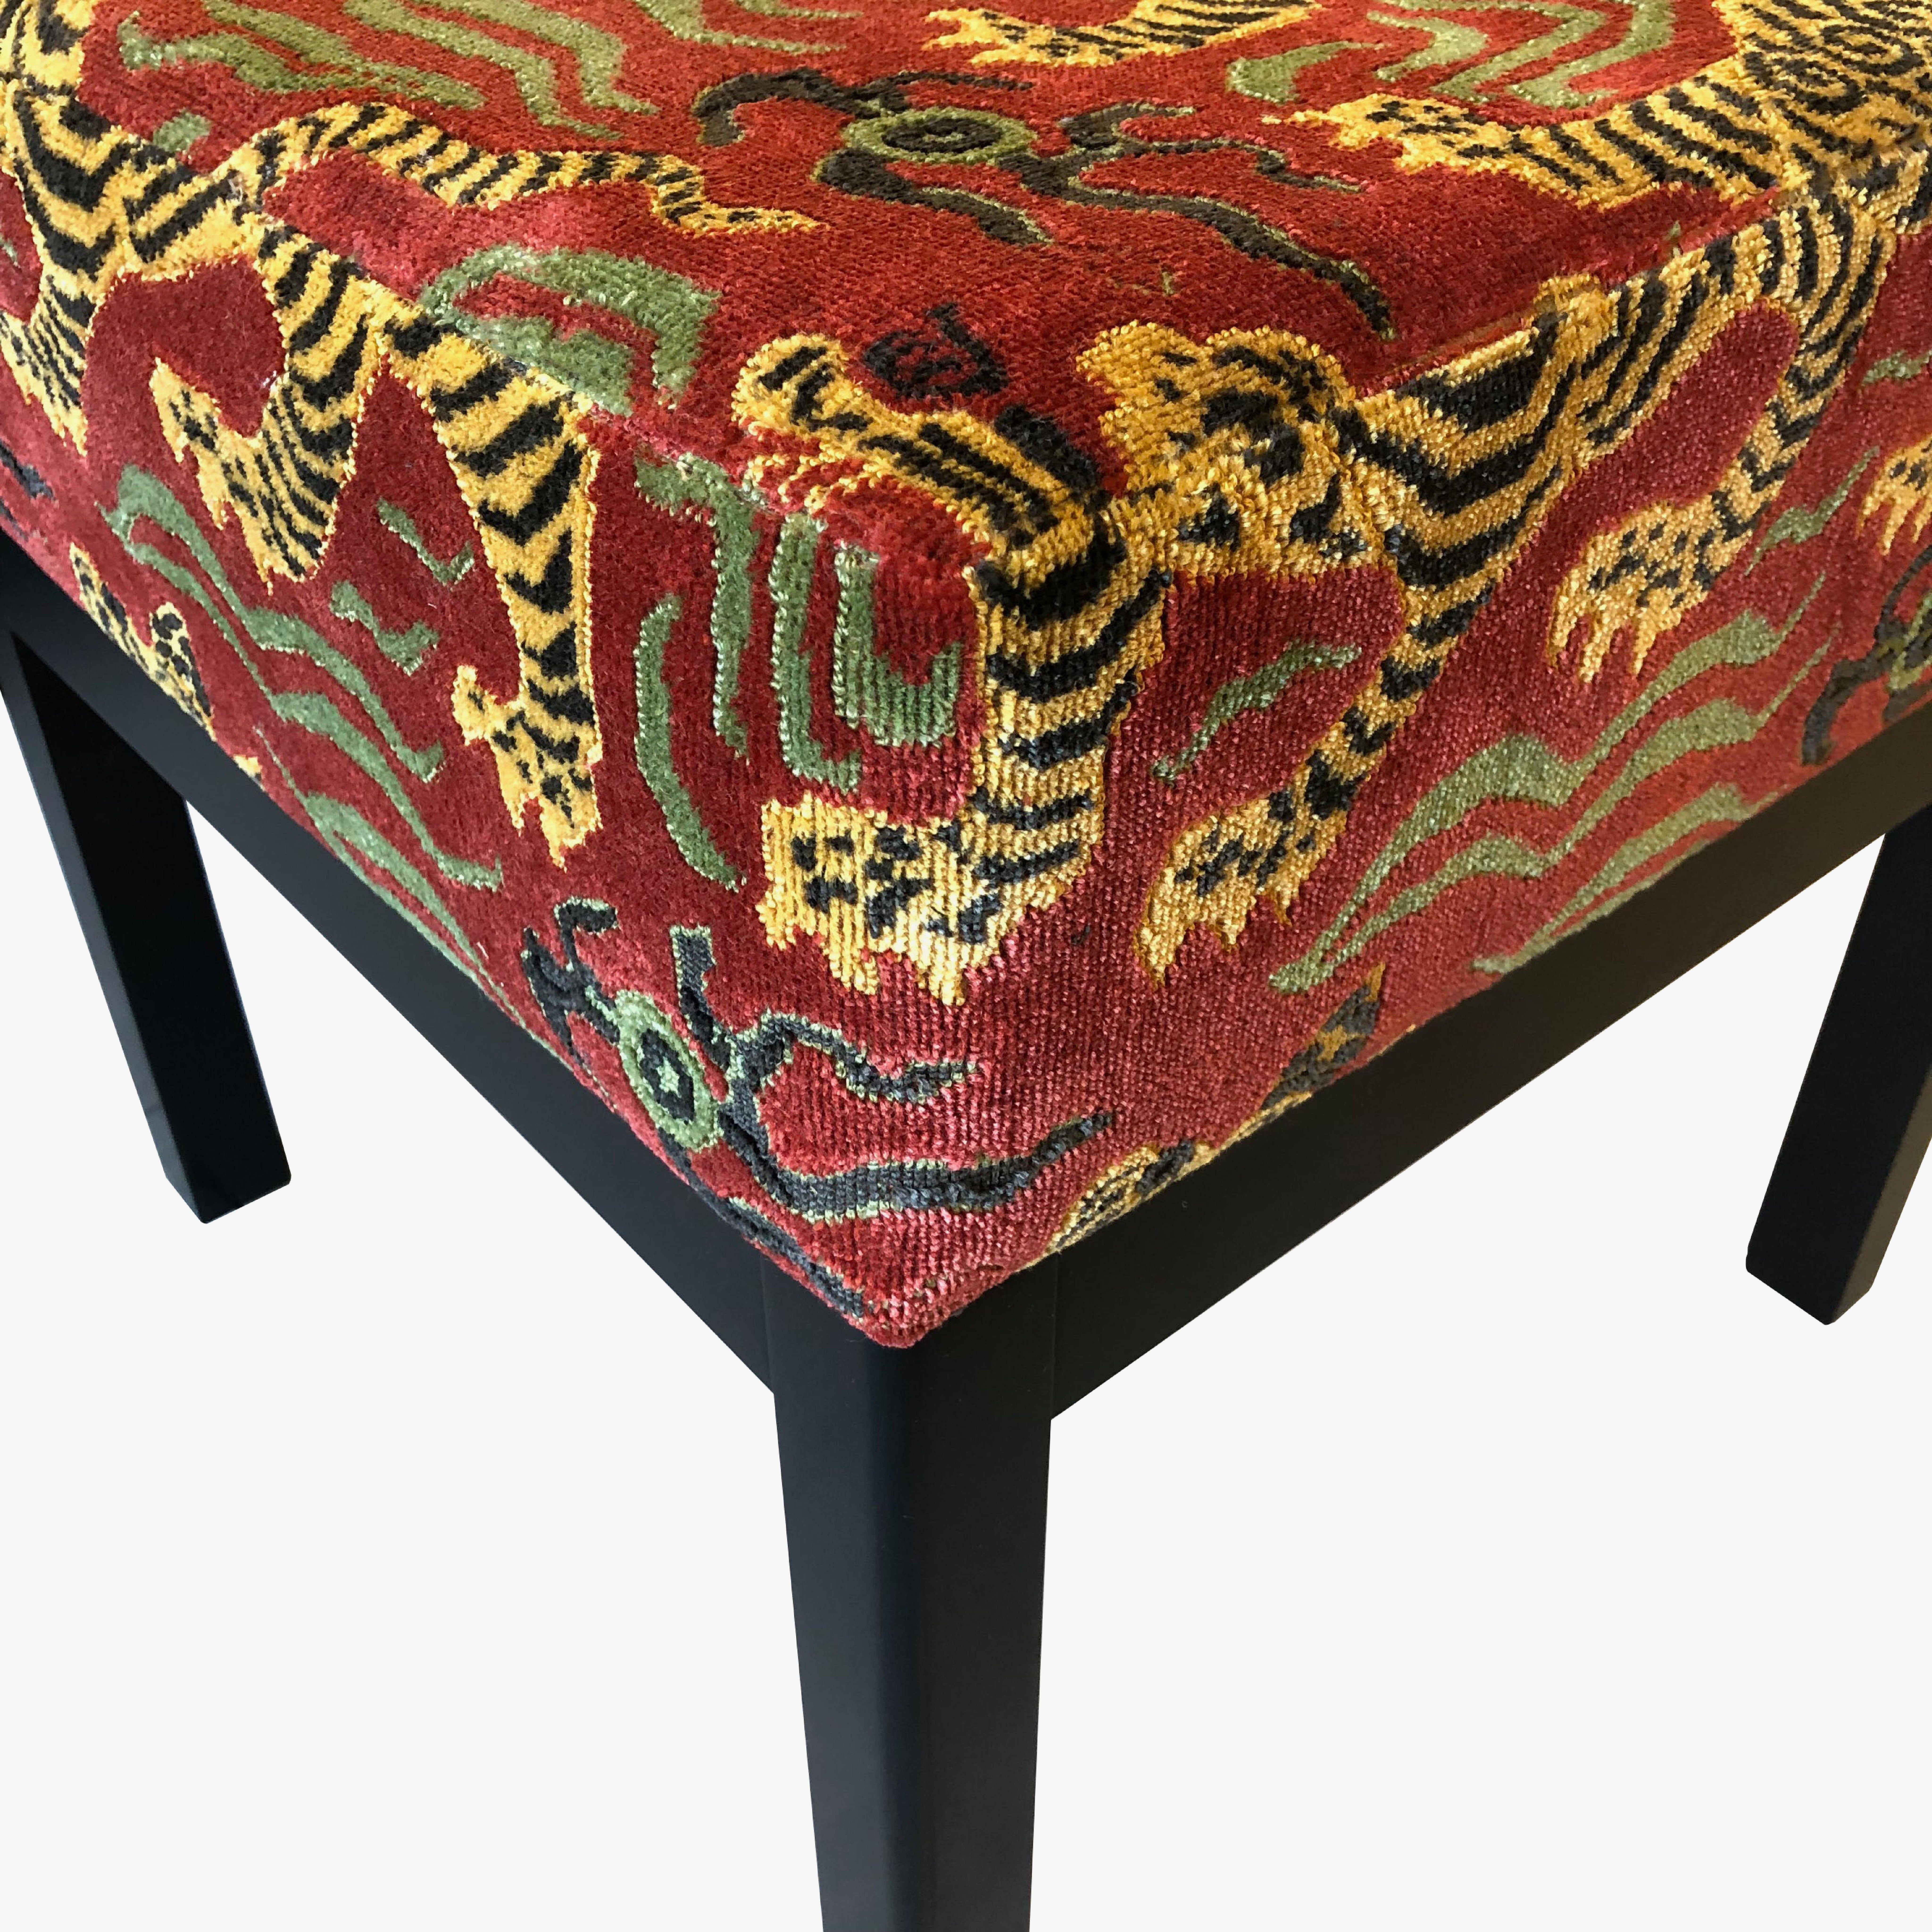 North American Pair of Classic Square Low Stools in Clarence House Tibet Dragon